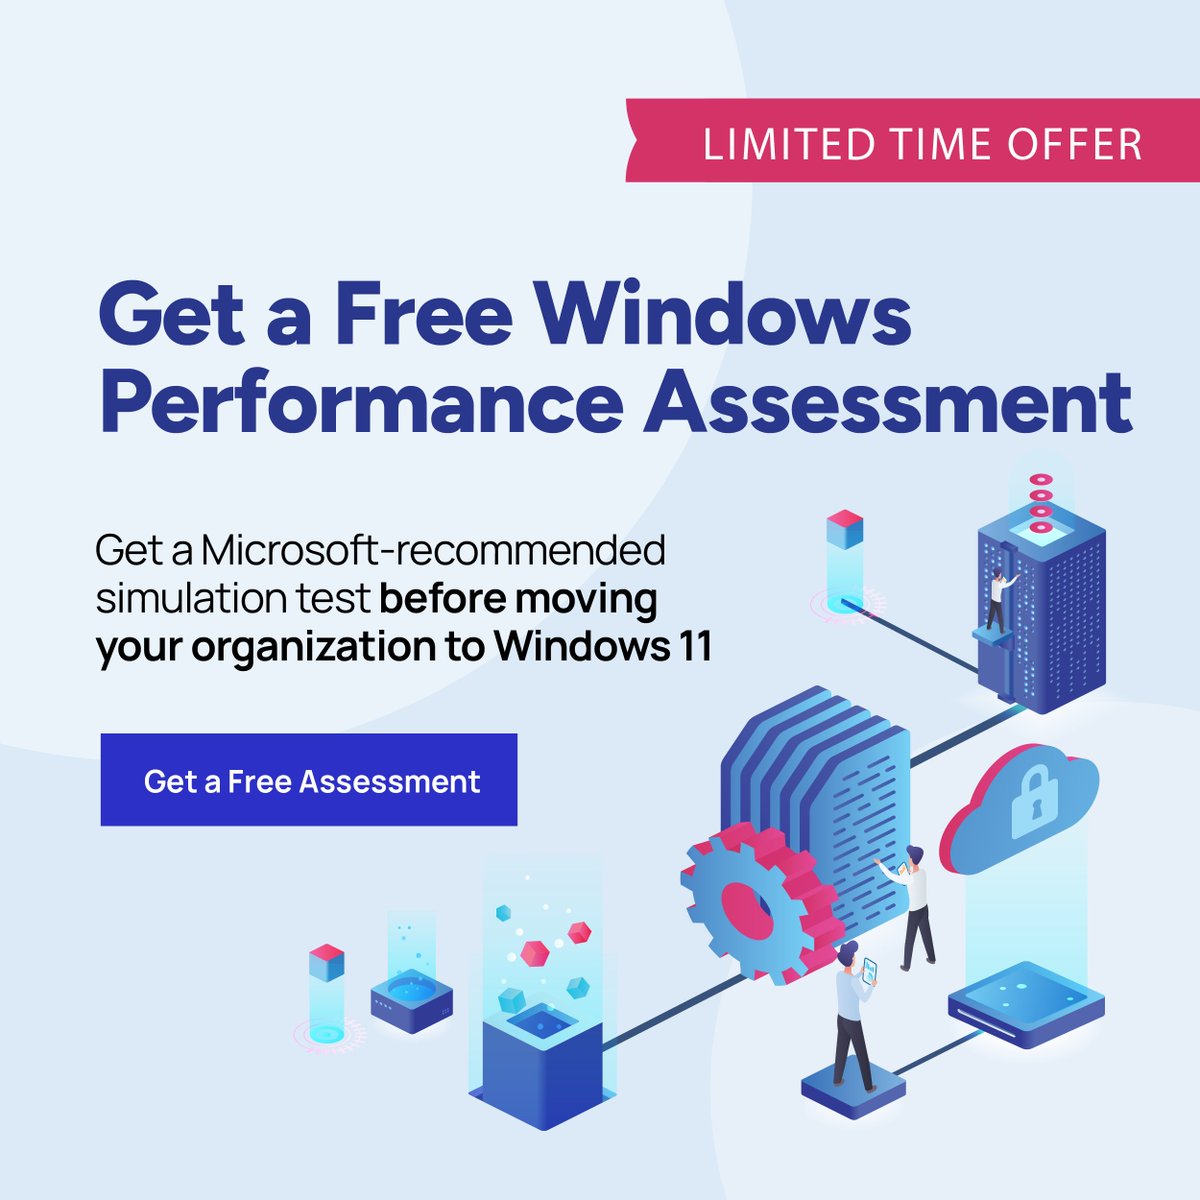 Considering the leap to #Windows11? Get clarity with our free Performance Assessment! Simulate your workload, compare experiences, and make an informed decision. Limited time offer! 

#KnowBeforeYouGo: hubs.ly/Q02t8Gsv0

#LoginVSI #windows10 #LoginEnterprise #EUC #VDI #DaaS